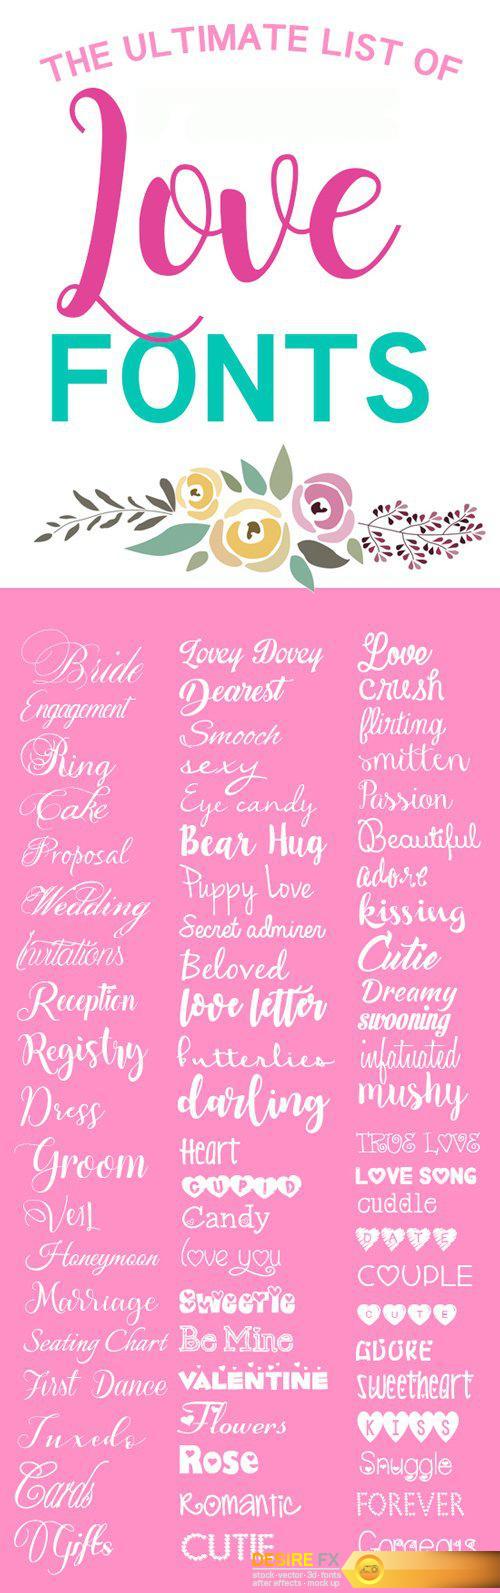 The Ultimate List Of Love Fonts 000023